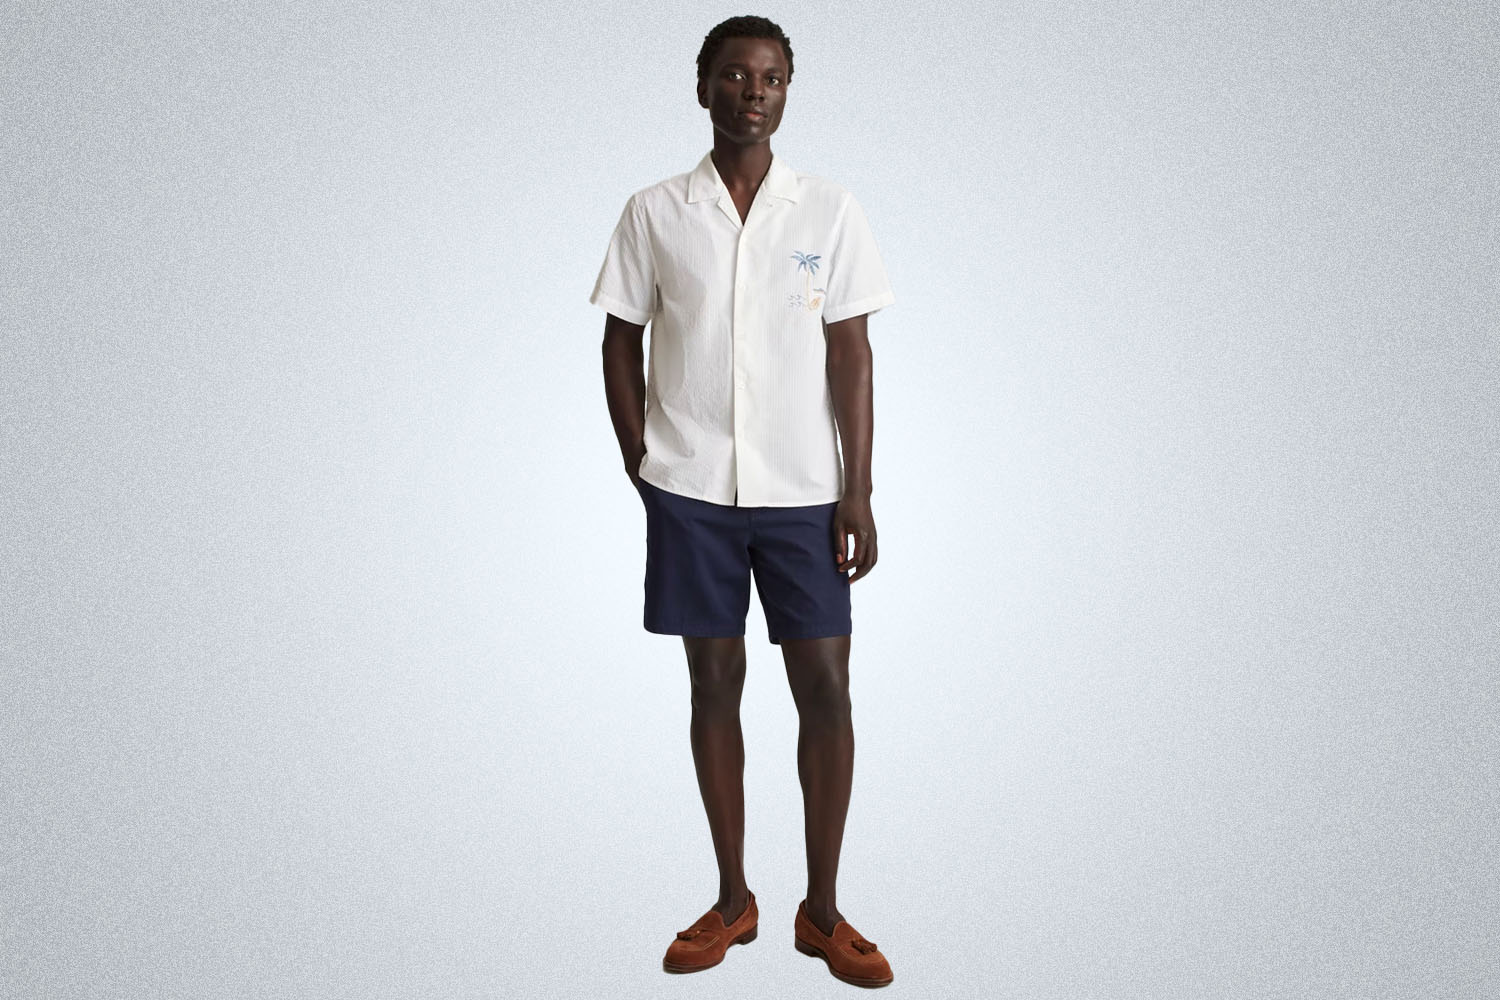 a model wearing an all white riviera shirt from Bonobos on a grey background